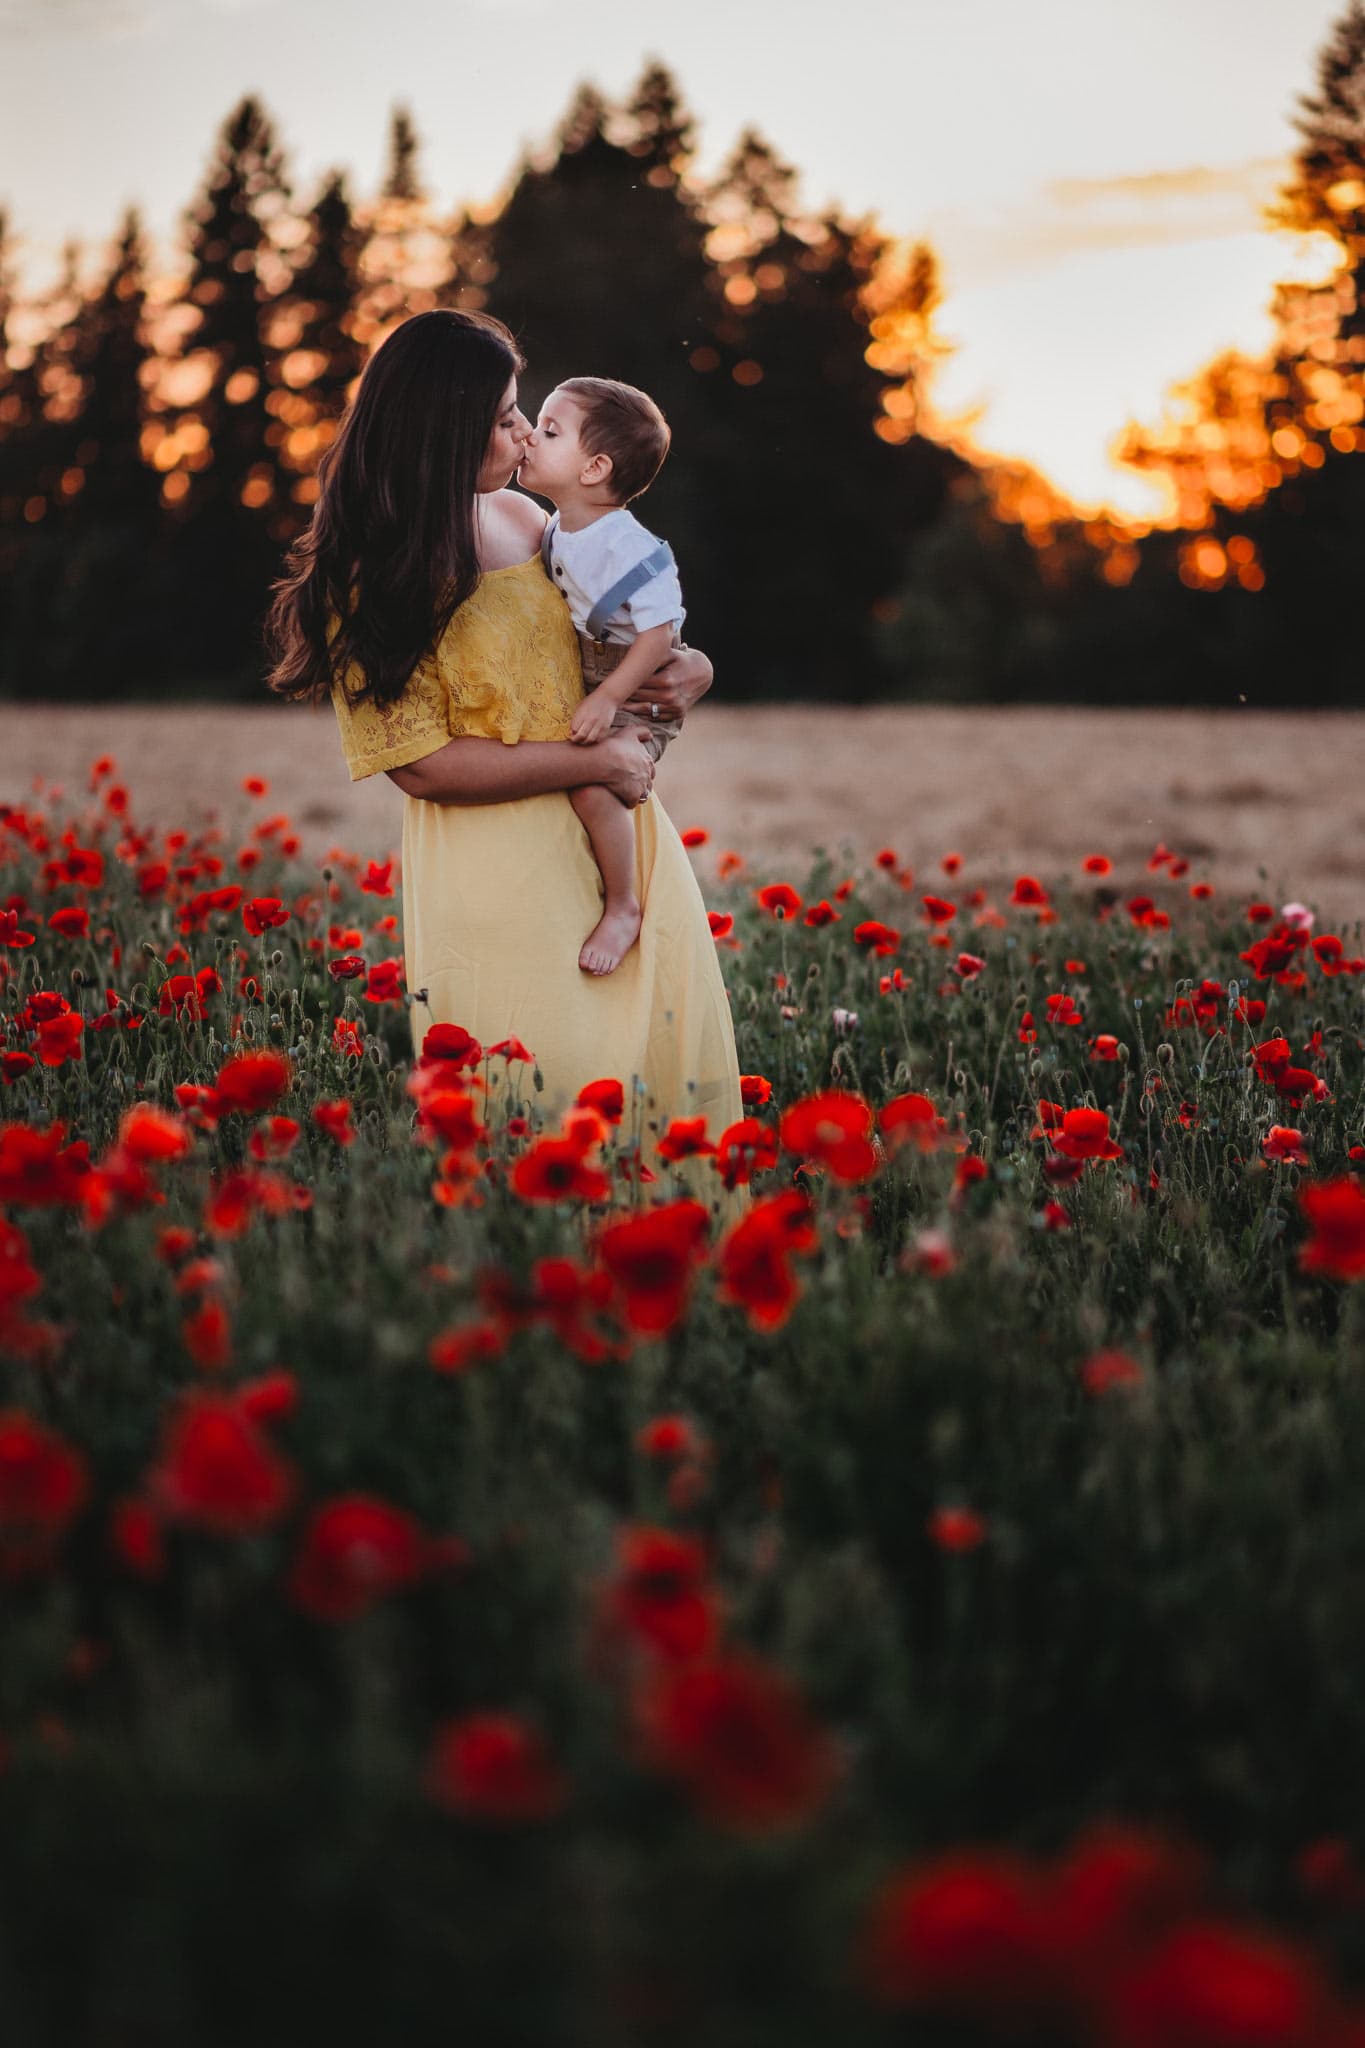 Mom and toddler kissing with Poppy flowers surrounding them